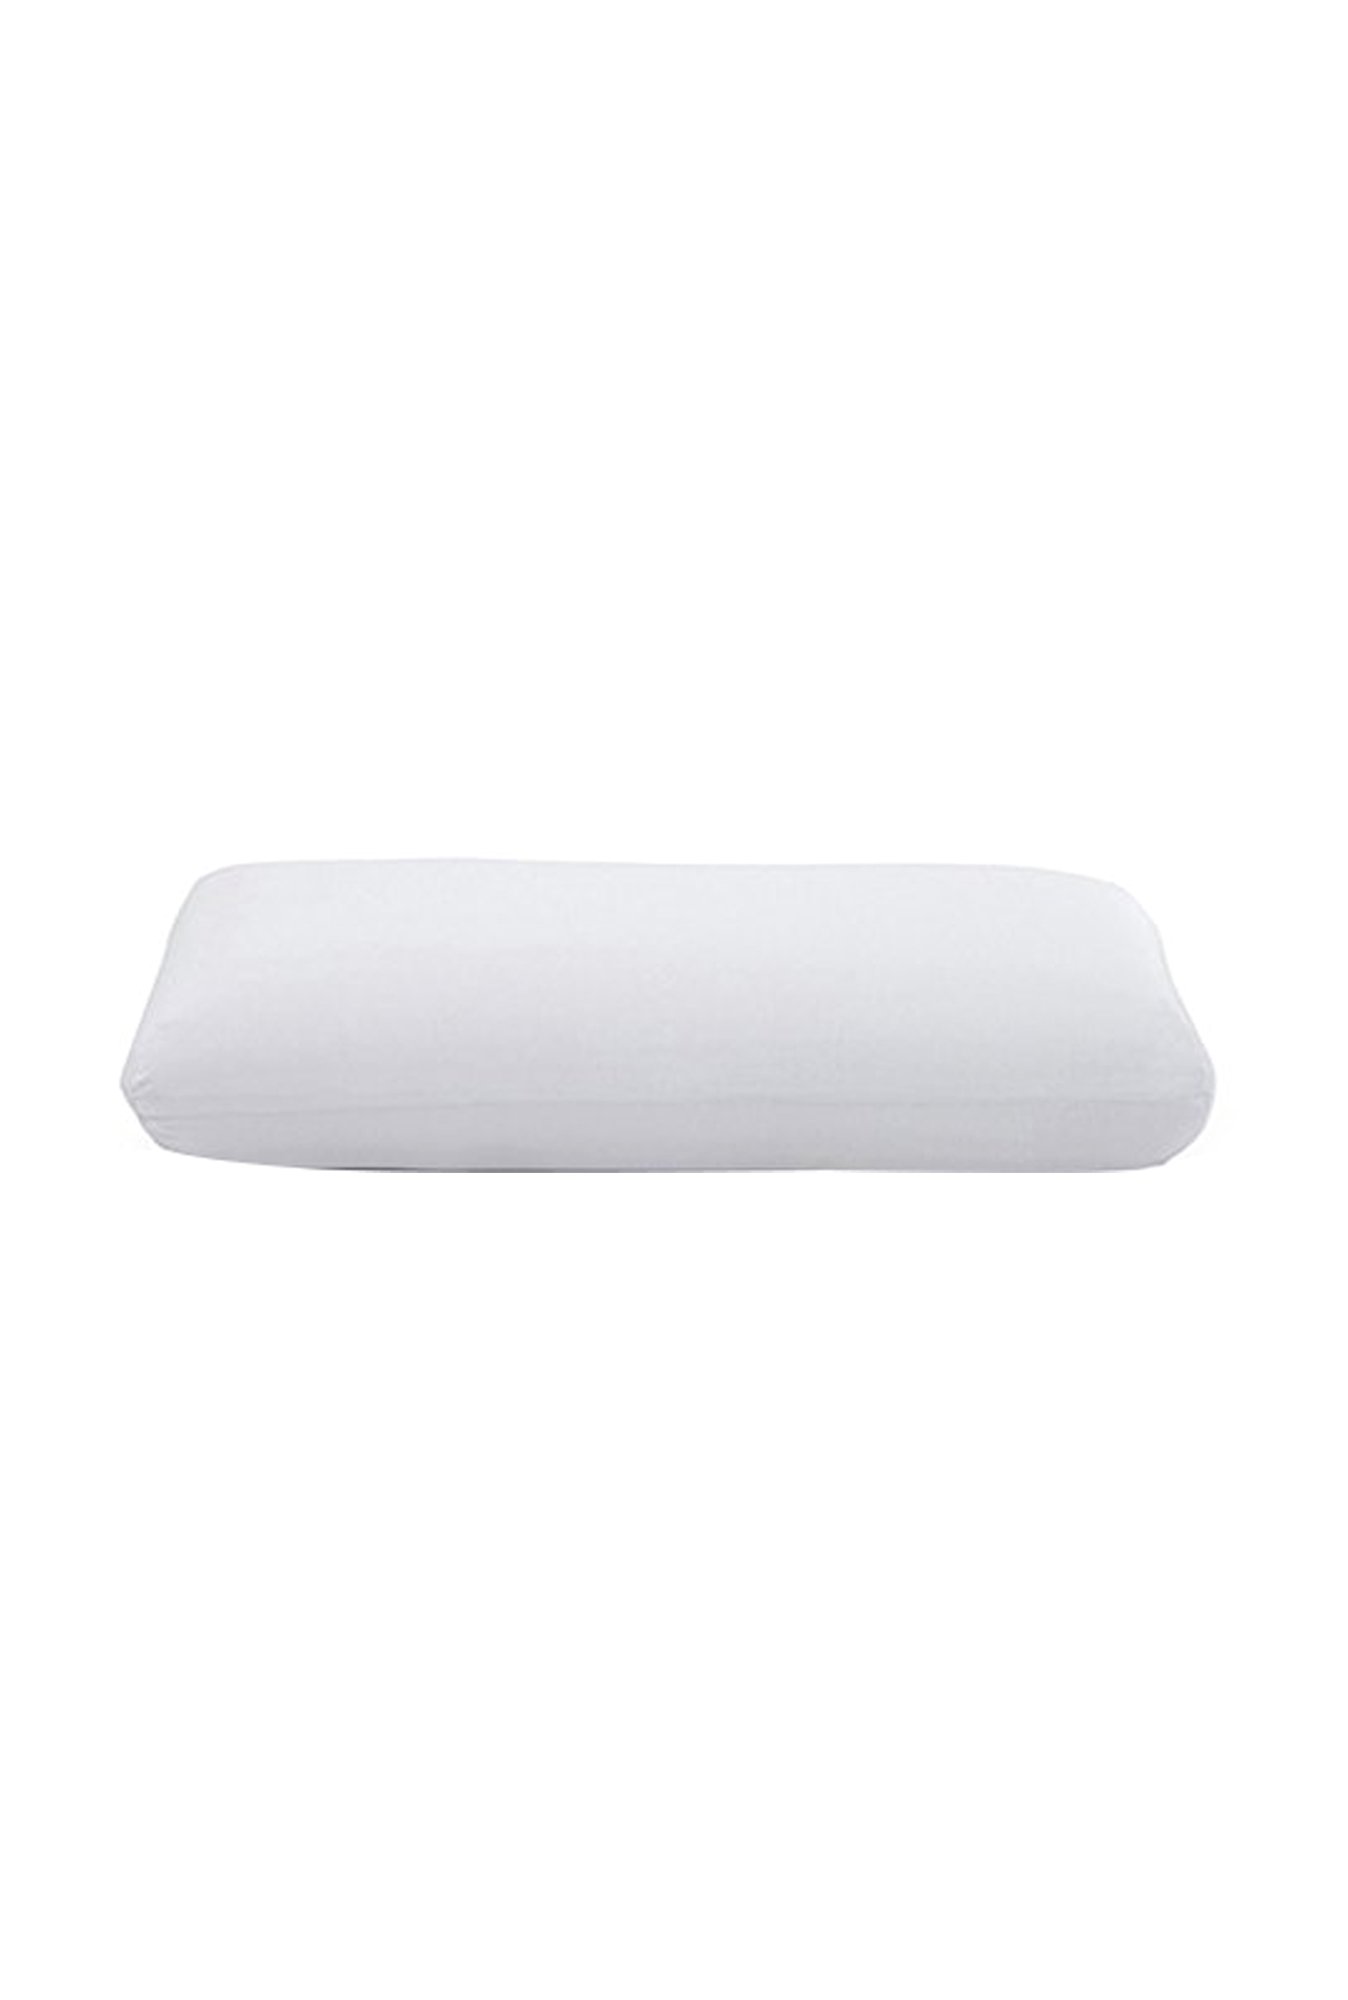 The White Willow White Stitched Memory Foam Pillow Set Of 1 From The White Willow At Best Prices On Tata Cliq